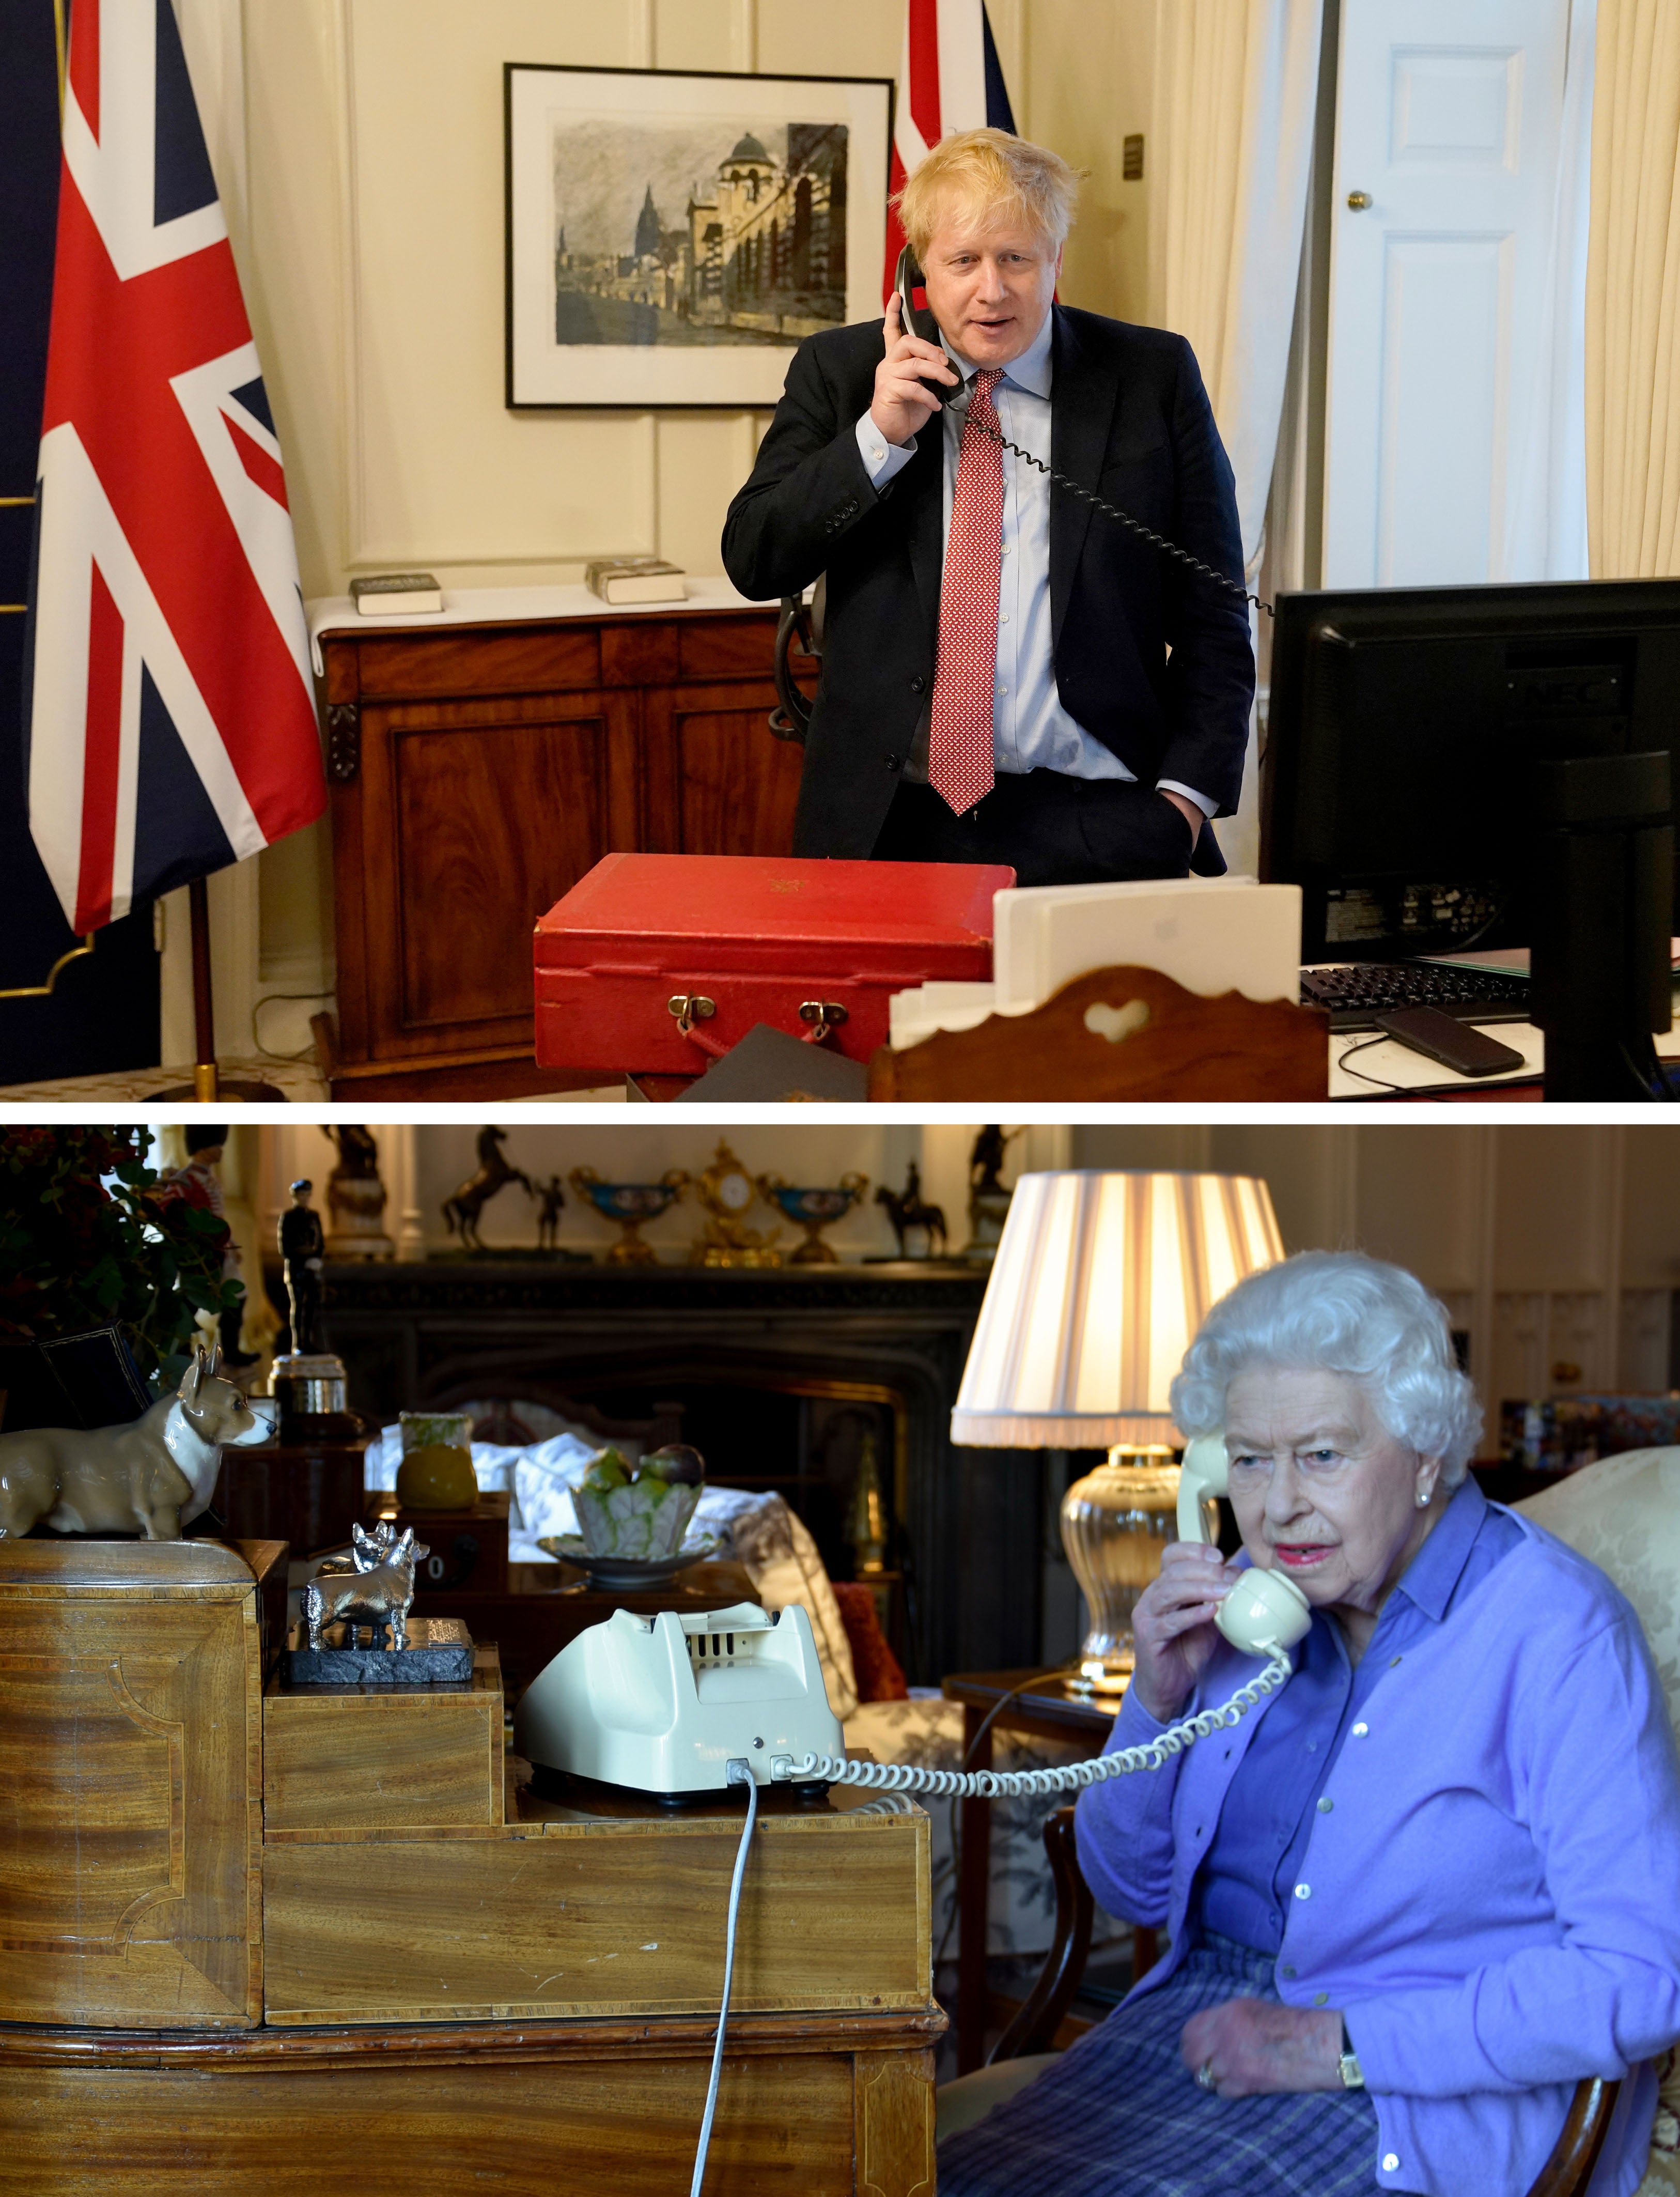 The PM on the phone to the Queen in March 2020 during the coronavirus pandemic (Andrew Parsons/10 Downing Street/Crown copyright/Buckingham Palace/PA)